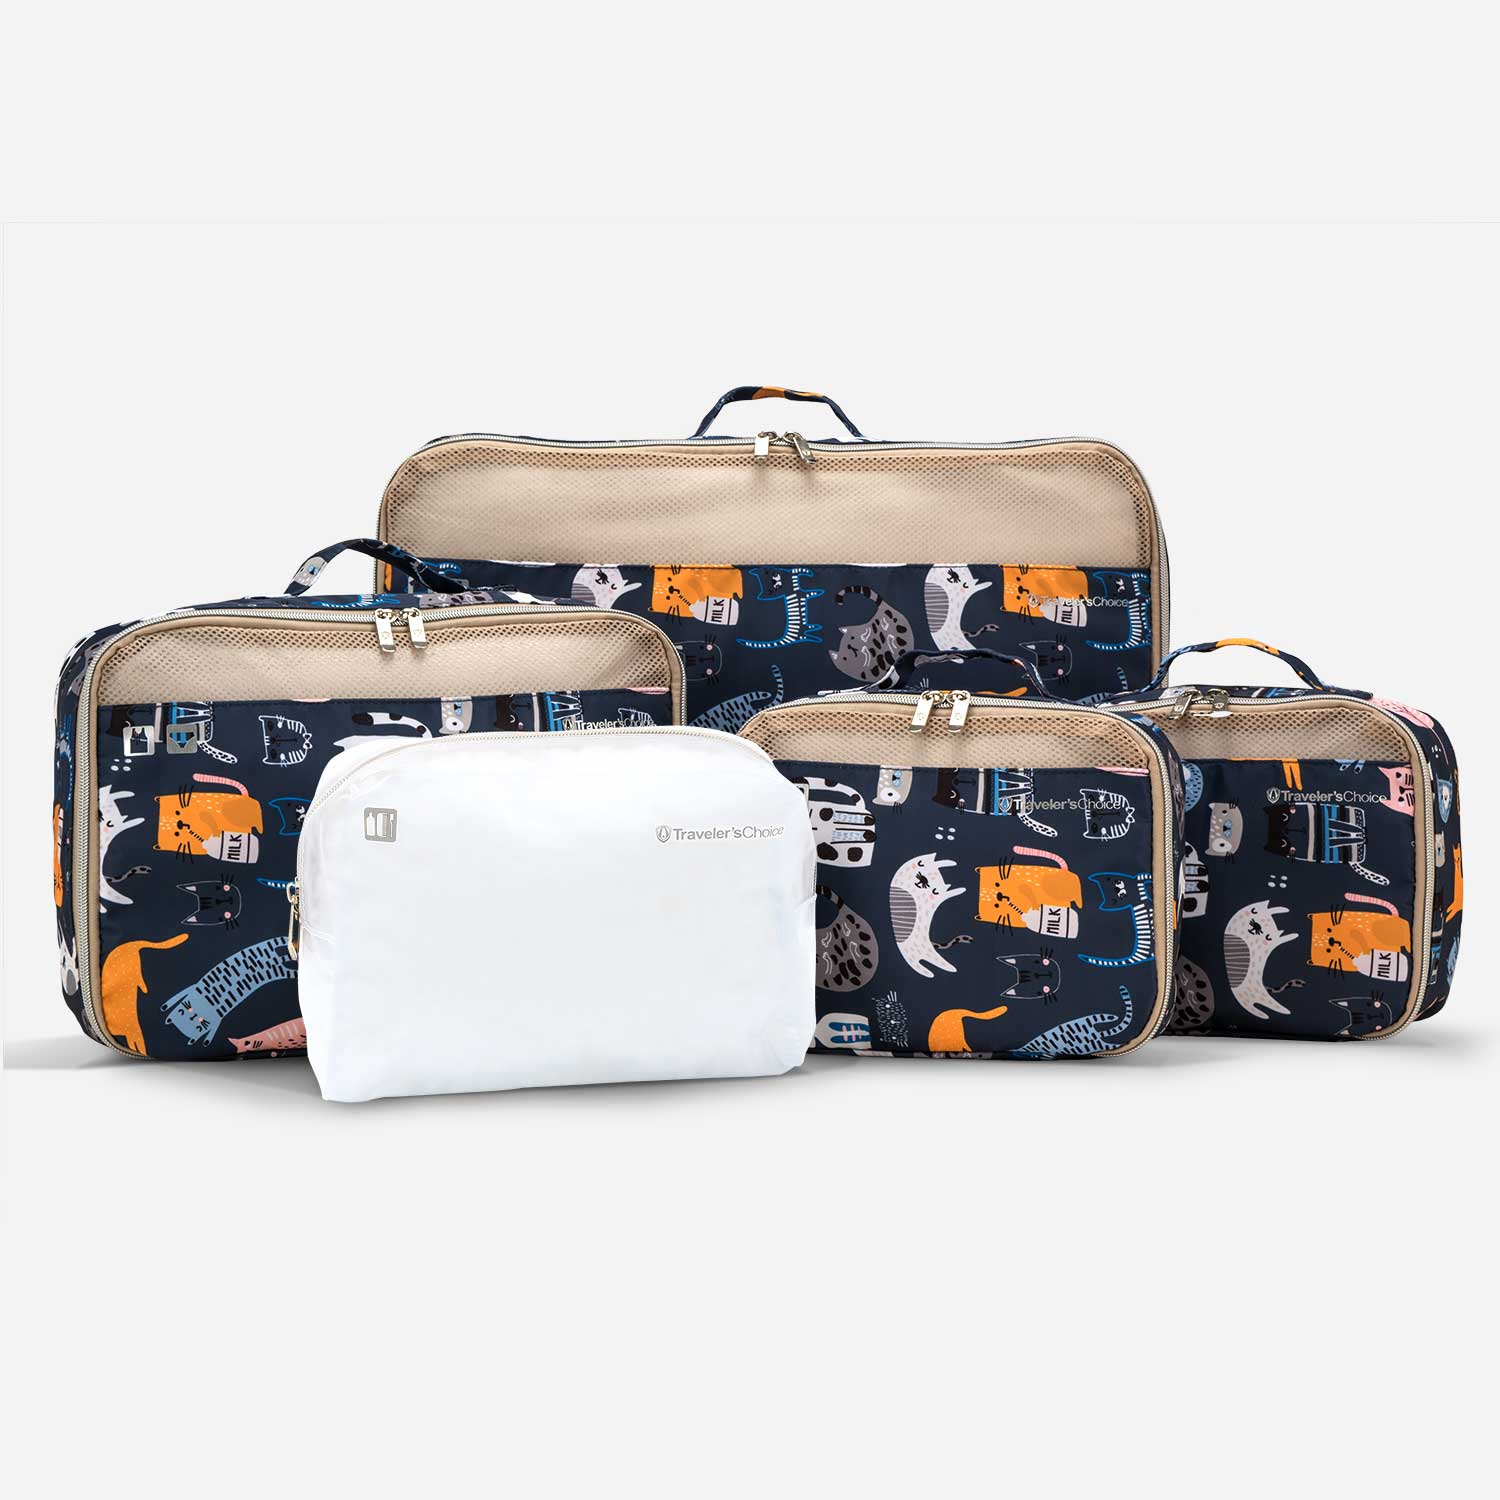 Cloverland Packing Cube Collection